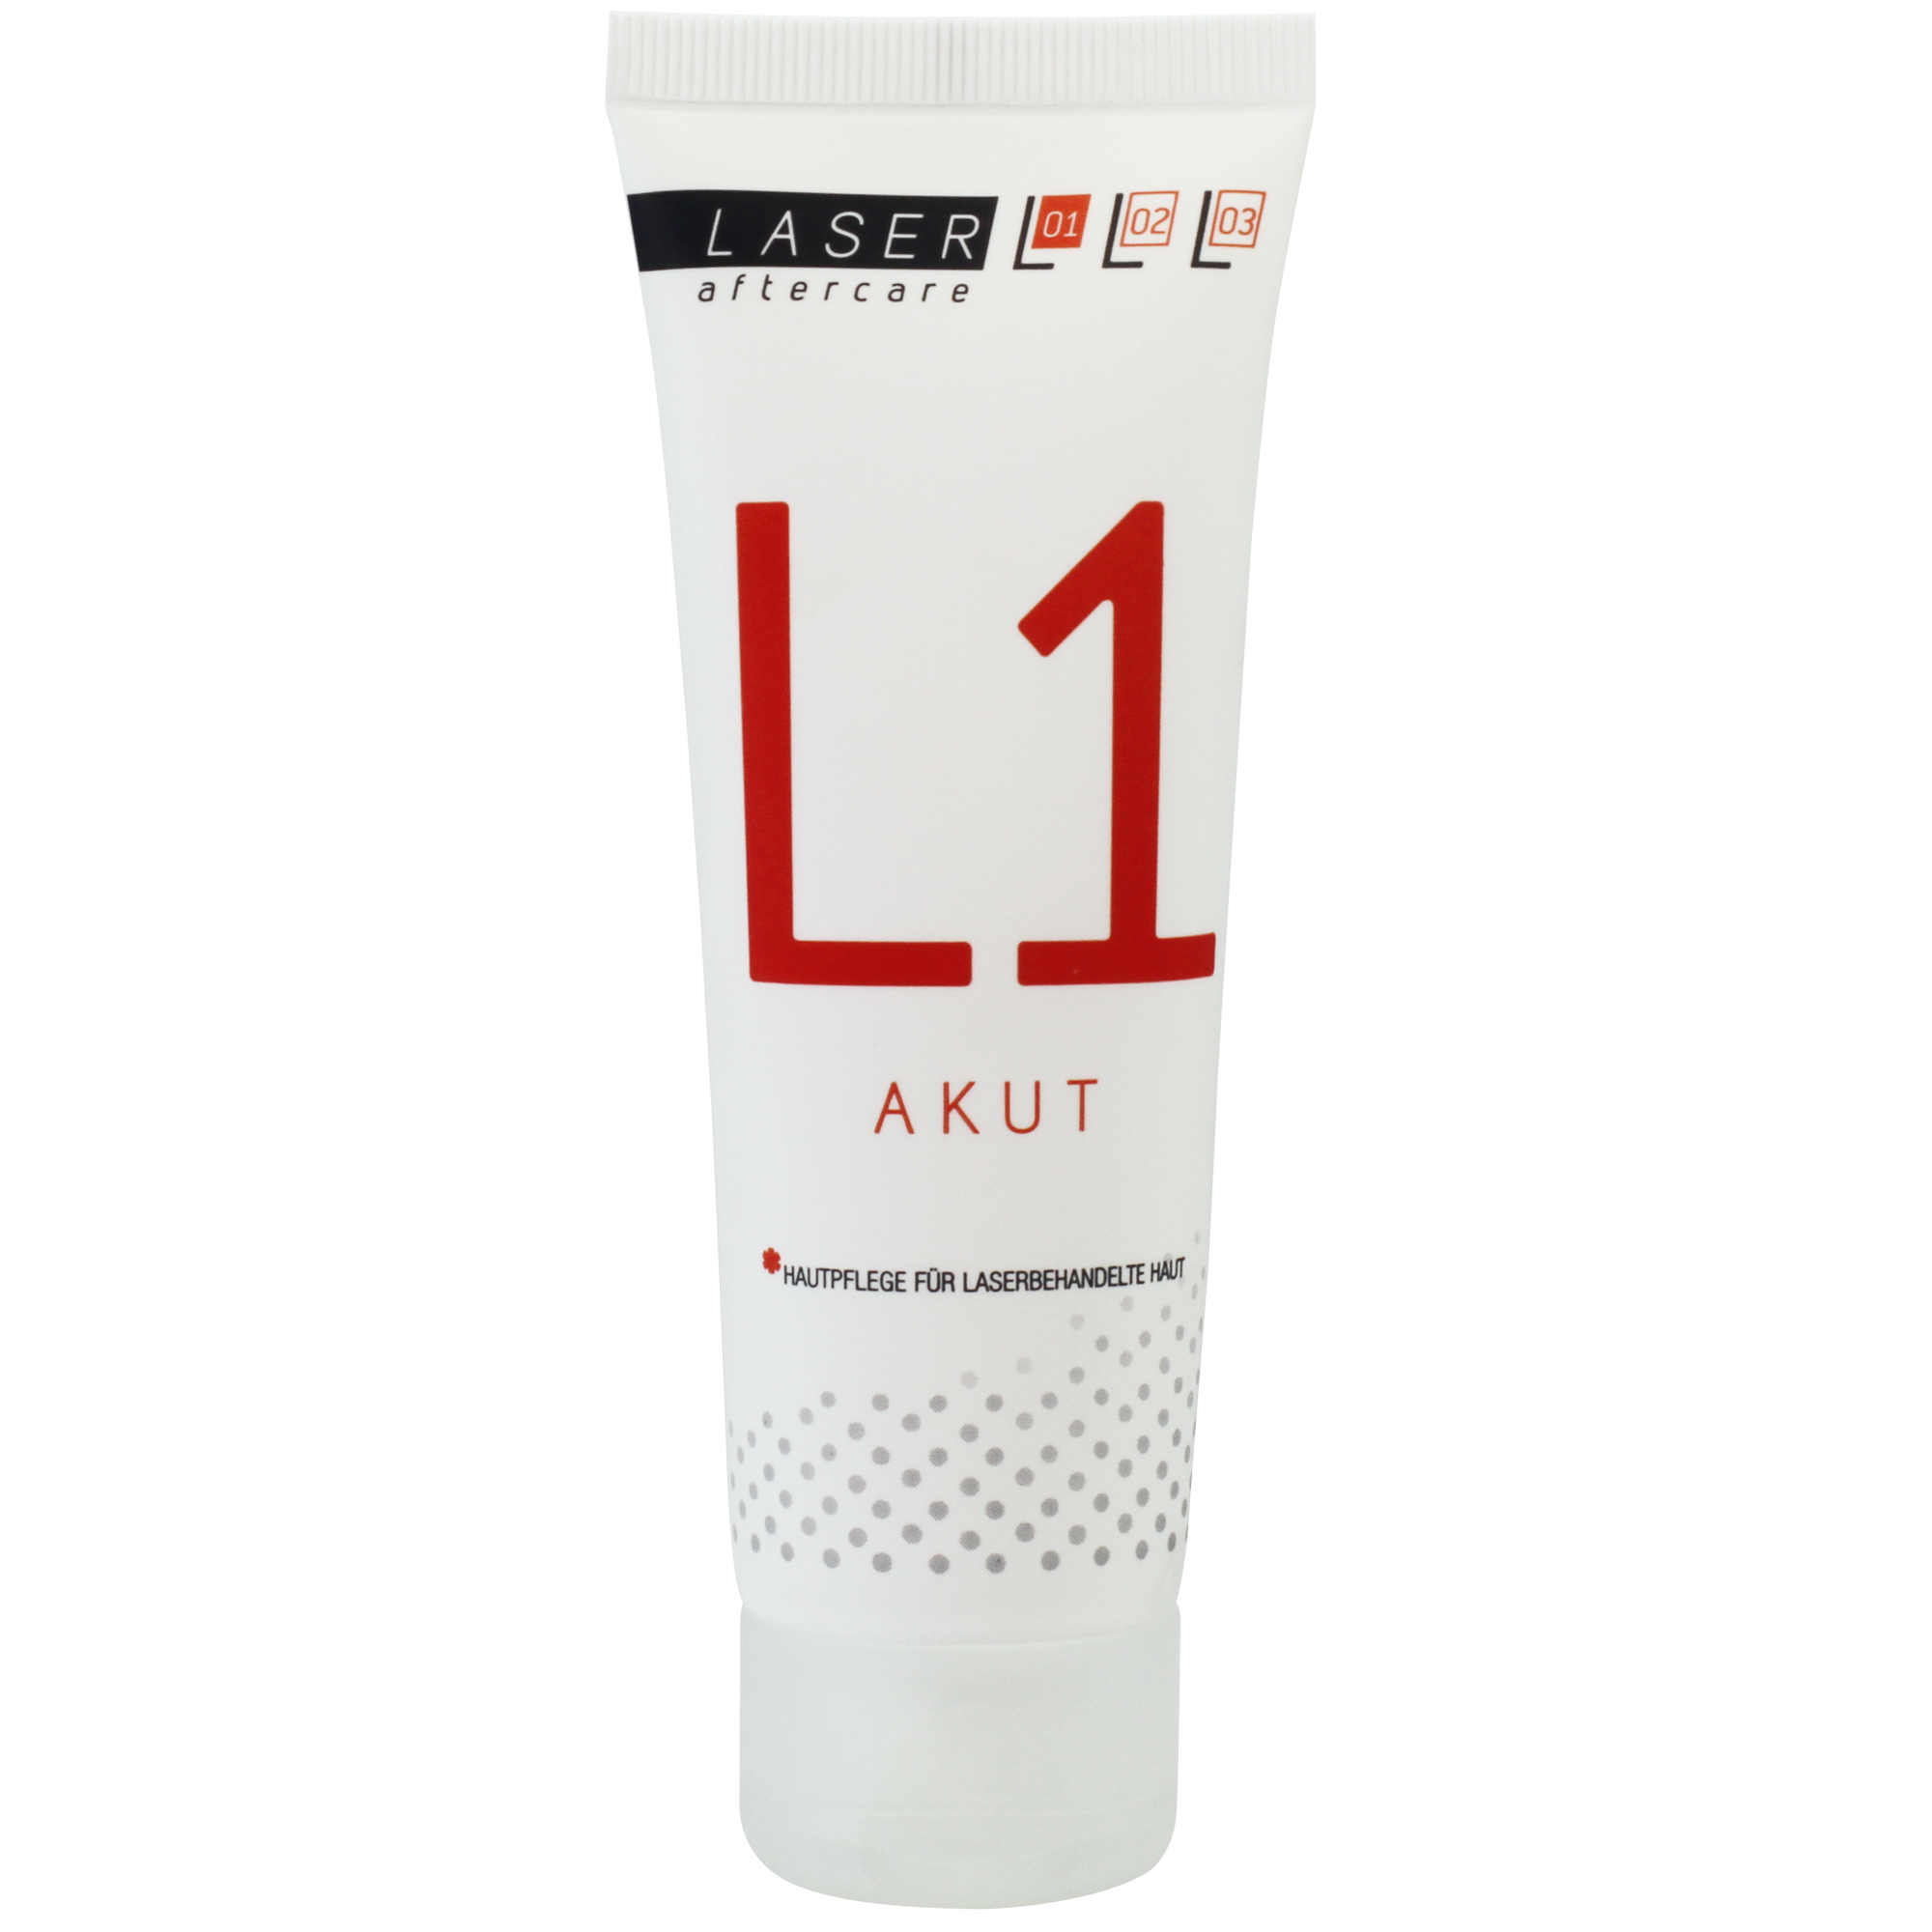 TattooMed laser aftercare L1 Akut 75 ml